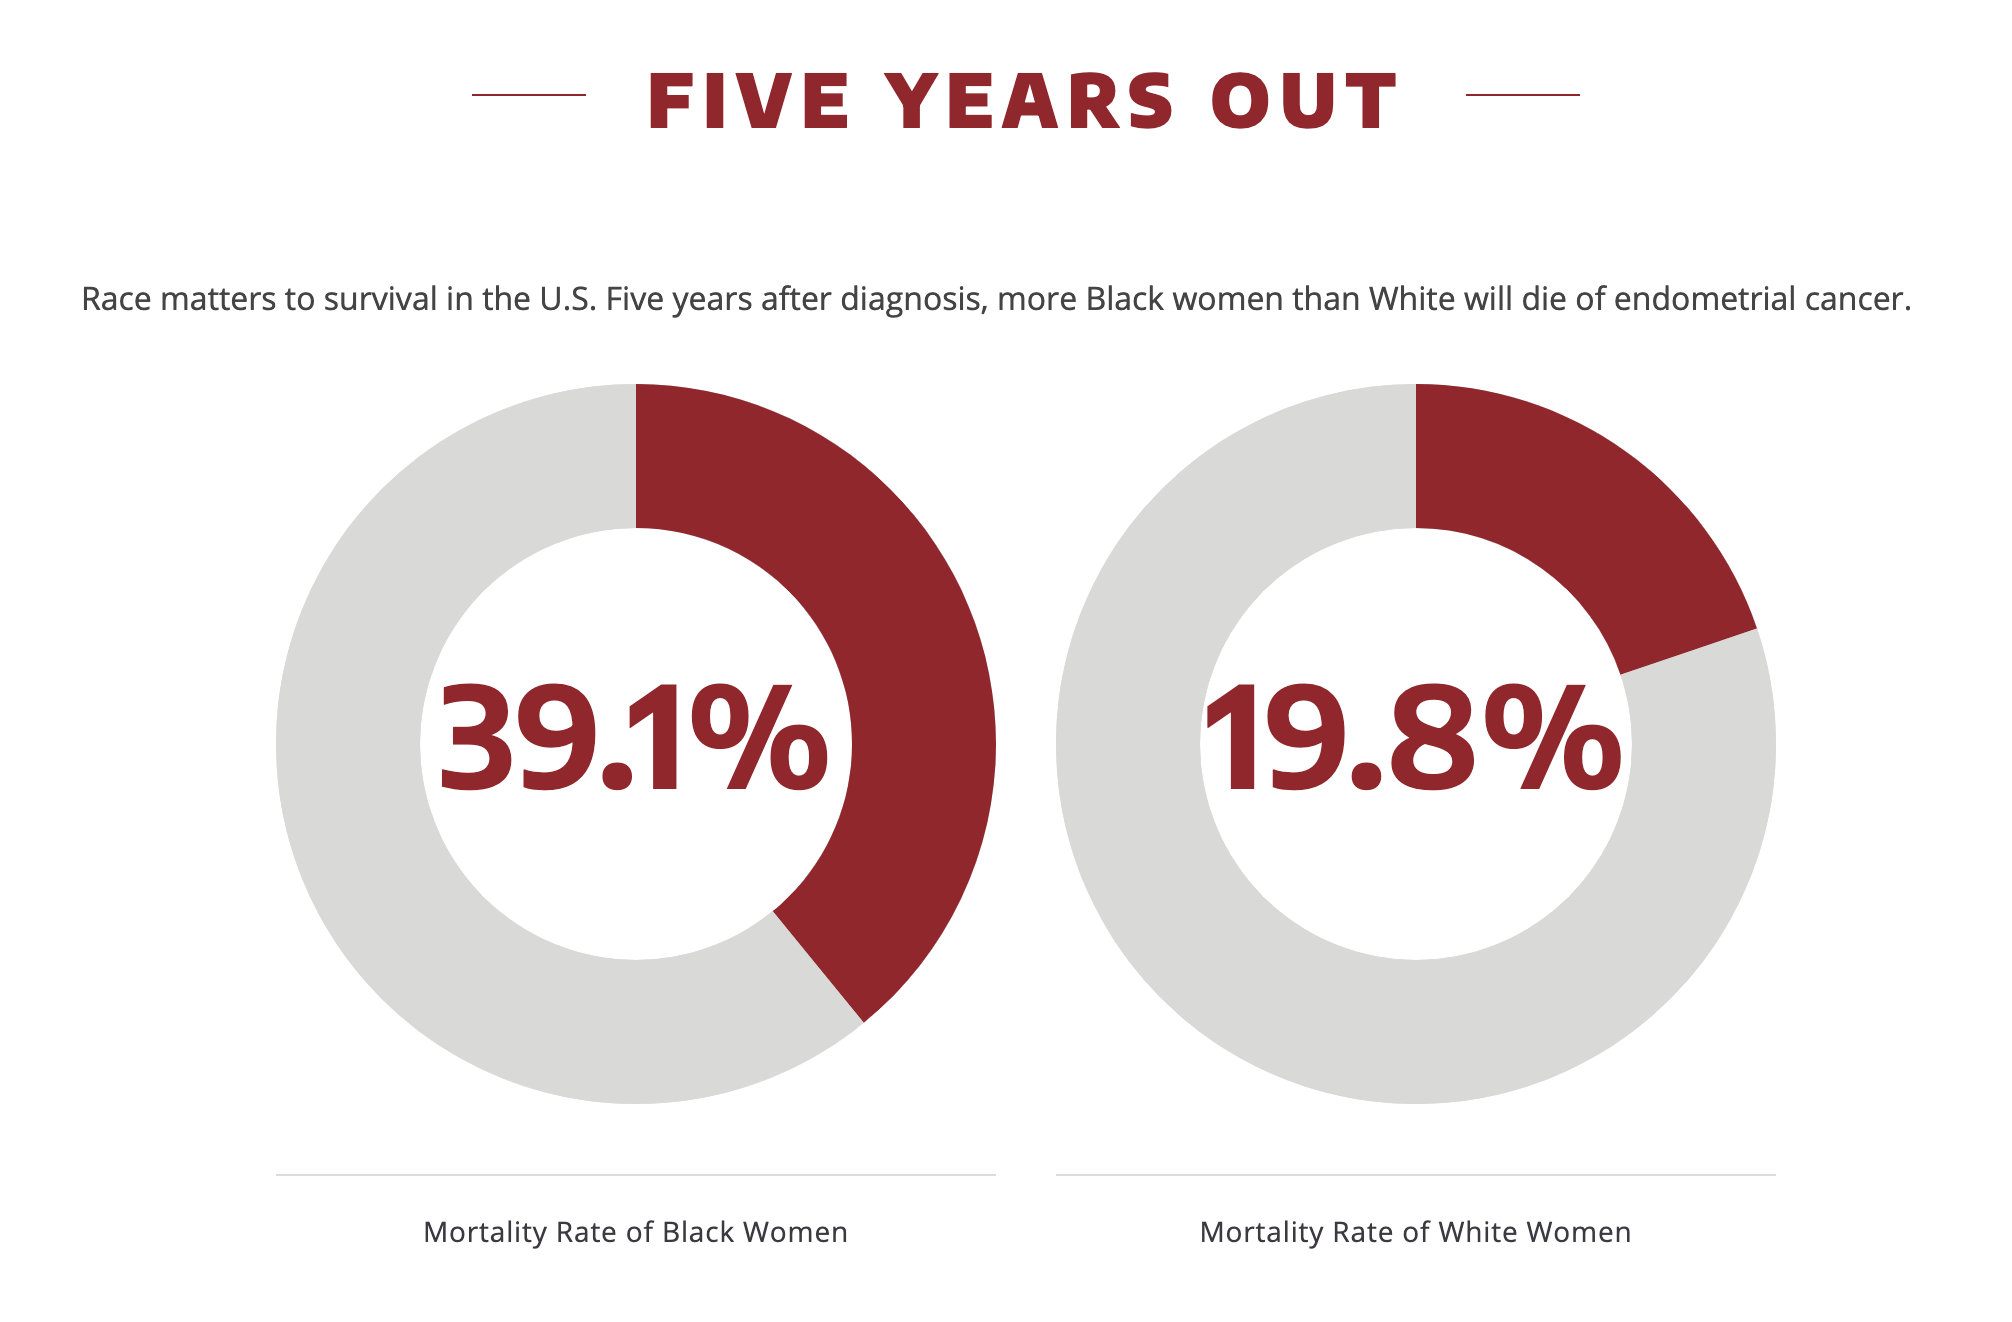 Graphic showing that Black women's 5-year mortality rate after a diagnosis with endometrial cancer is 39.1% and is 19.8% for white women.